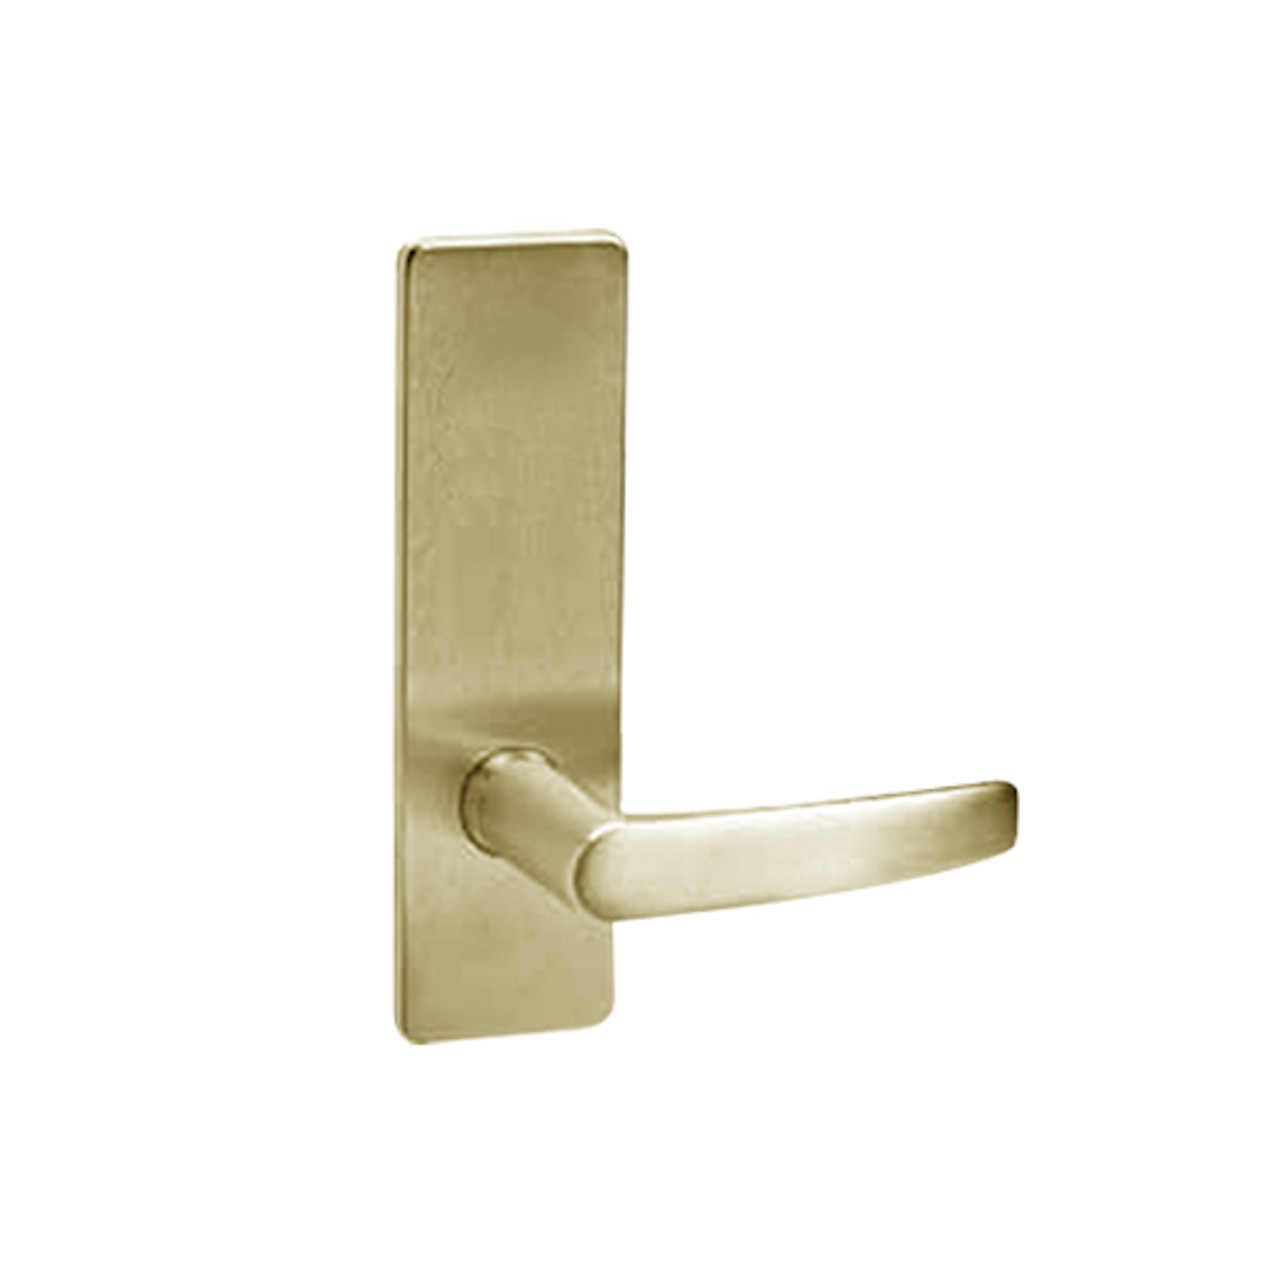 ML2060-ASP-606 Corbin Russwin ML2000 Series Mortise Privacy Locksets with Armstrong Lever in Satin Brass